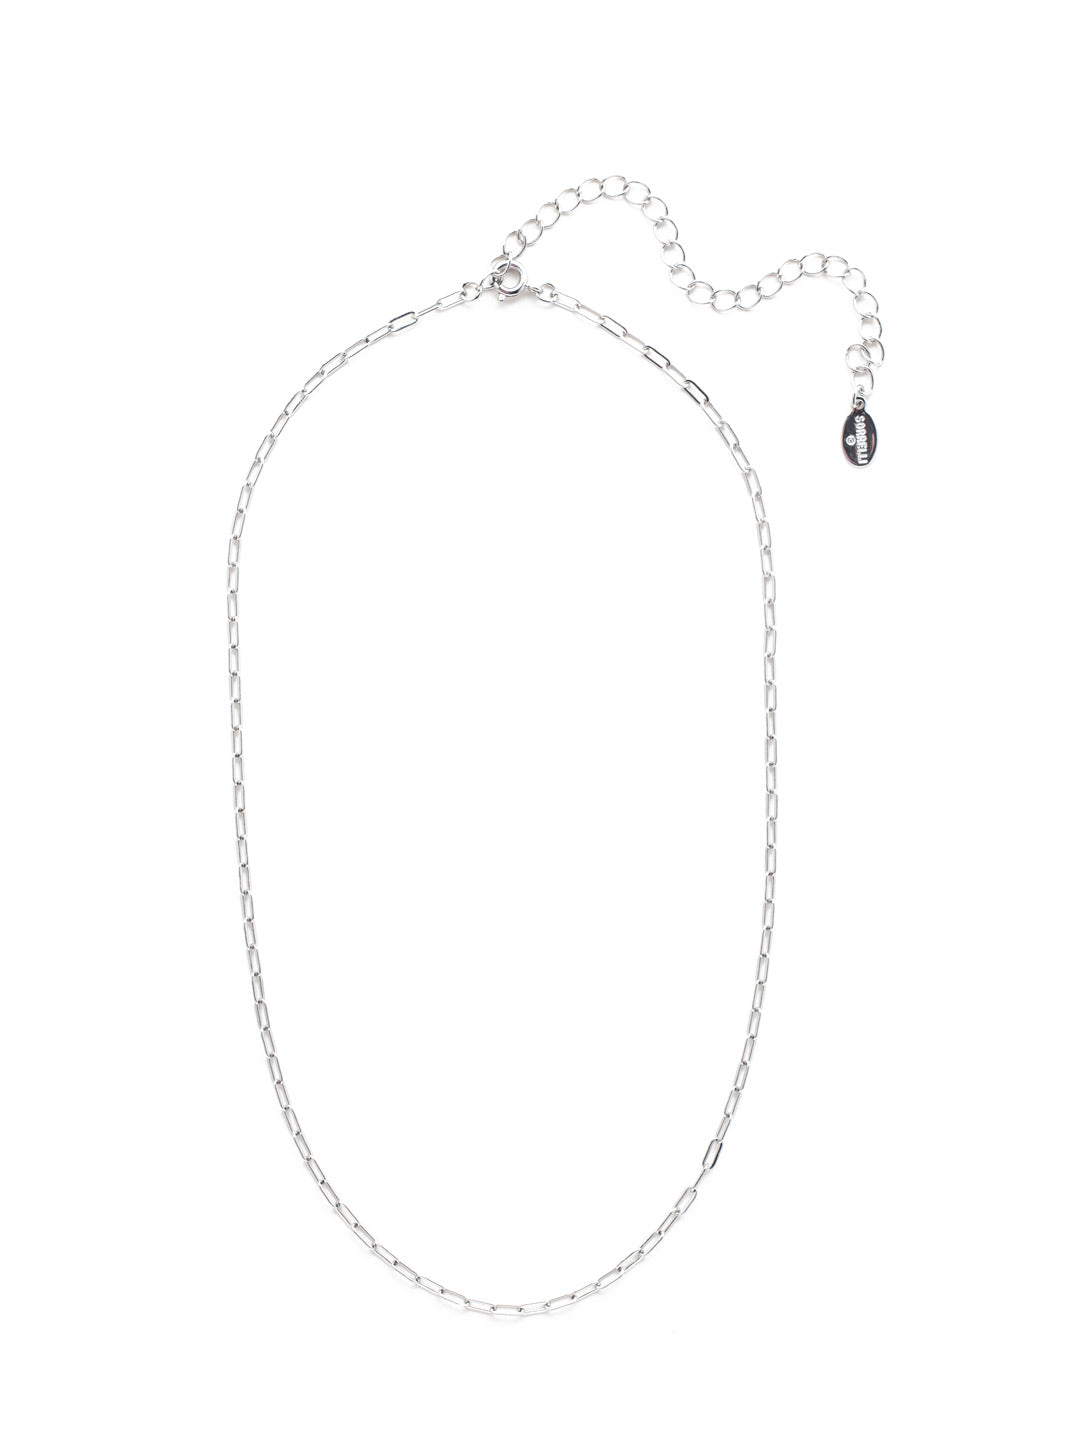 Minnie Chain Tennis Necklace - NEV109PDCRY - <p>The Minnie Chain Tennis Necklace is the Jacinda Tennis Necklace's little sister! A tiny take on the popular paperclip chain style makes this necklace a wardrobe staple that can be enjoyed for decades. From Sorrelli's Crystal collection in our Palladium finish.</p>